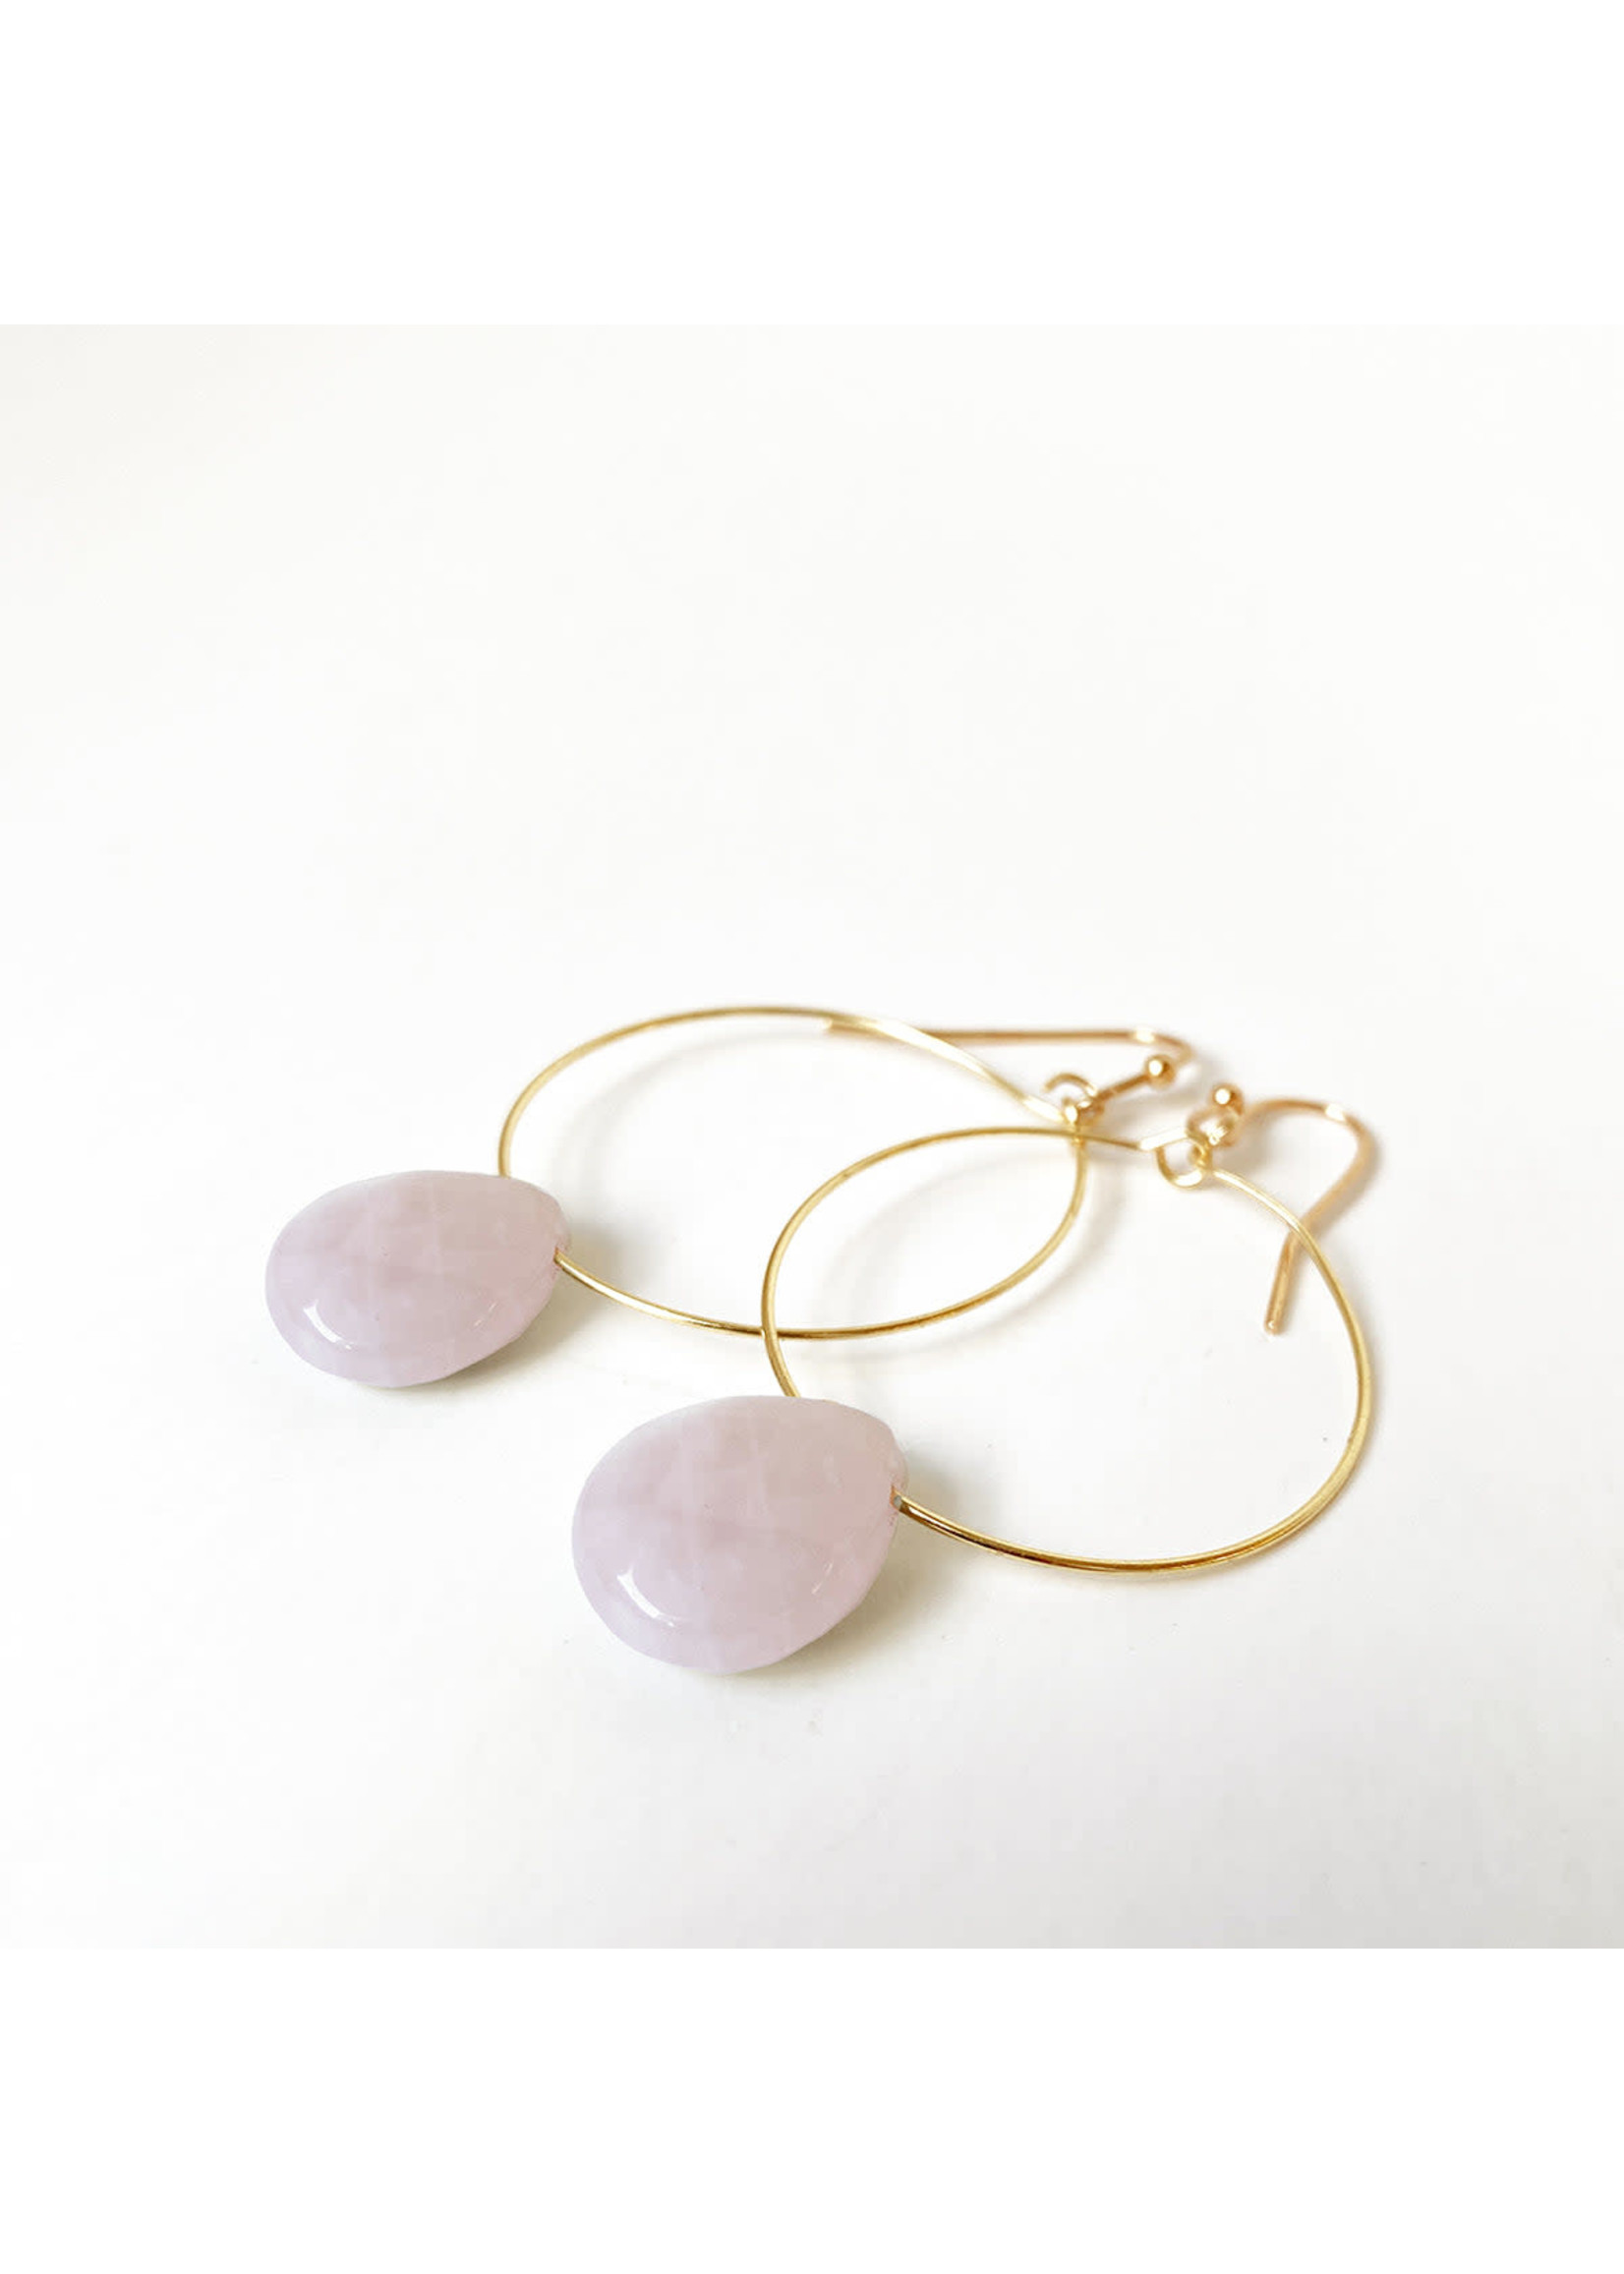 Pink & Gold Delicate Hoops with a Real Stone Drop